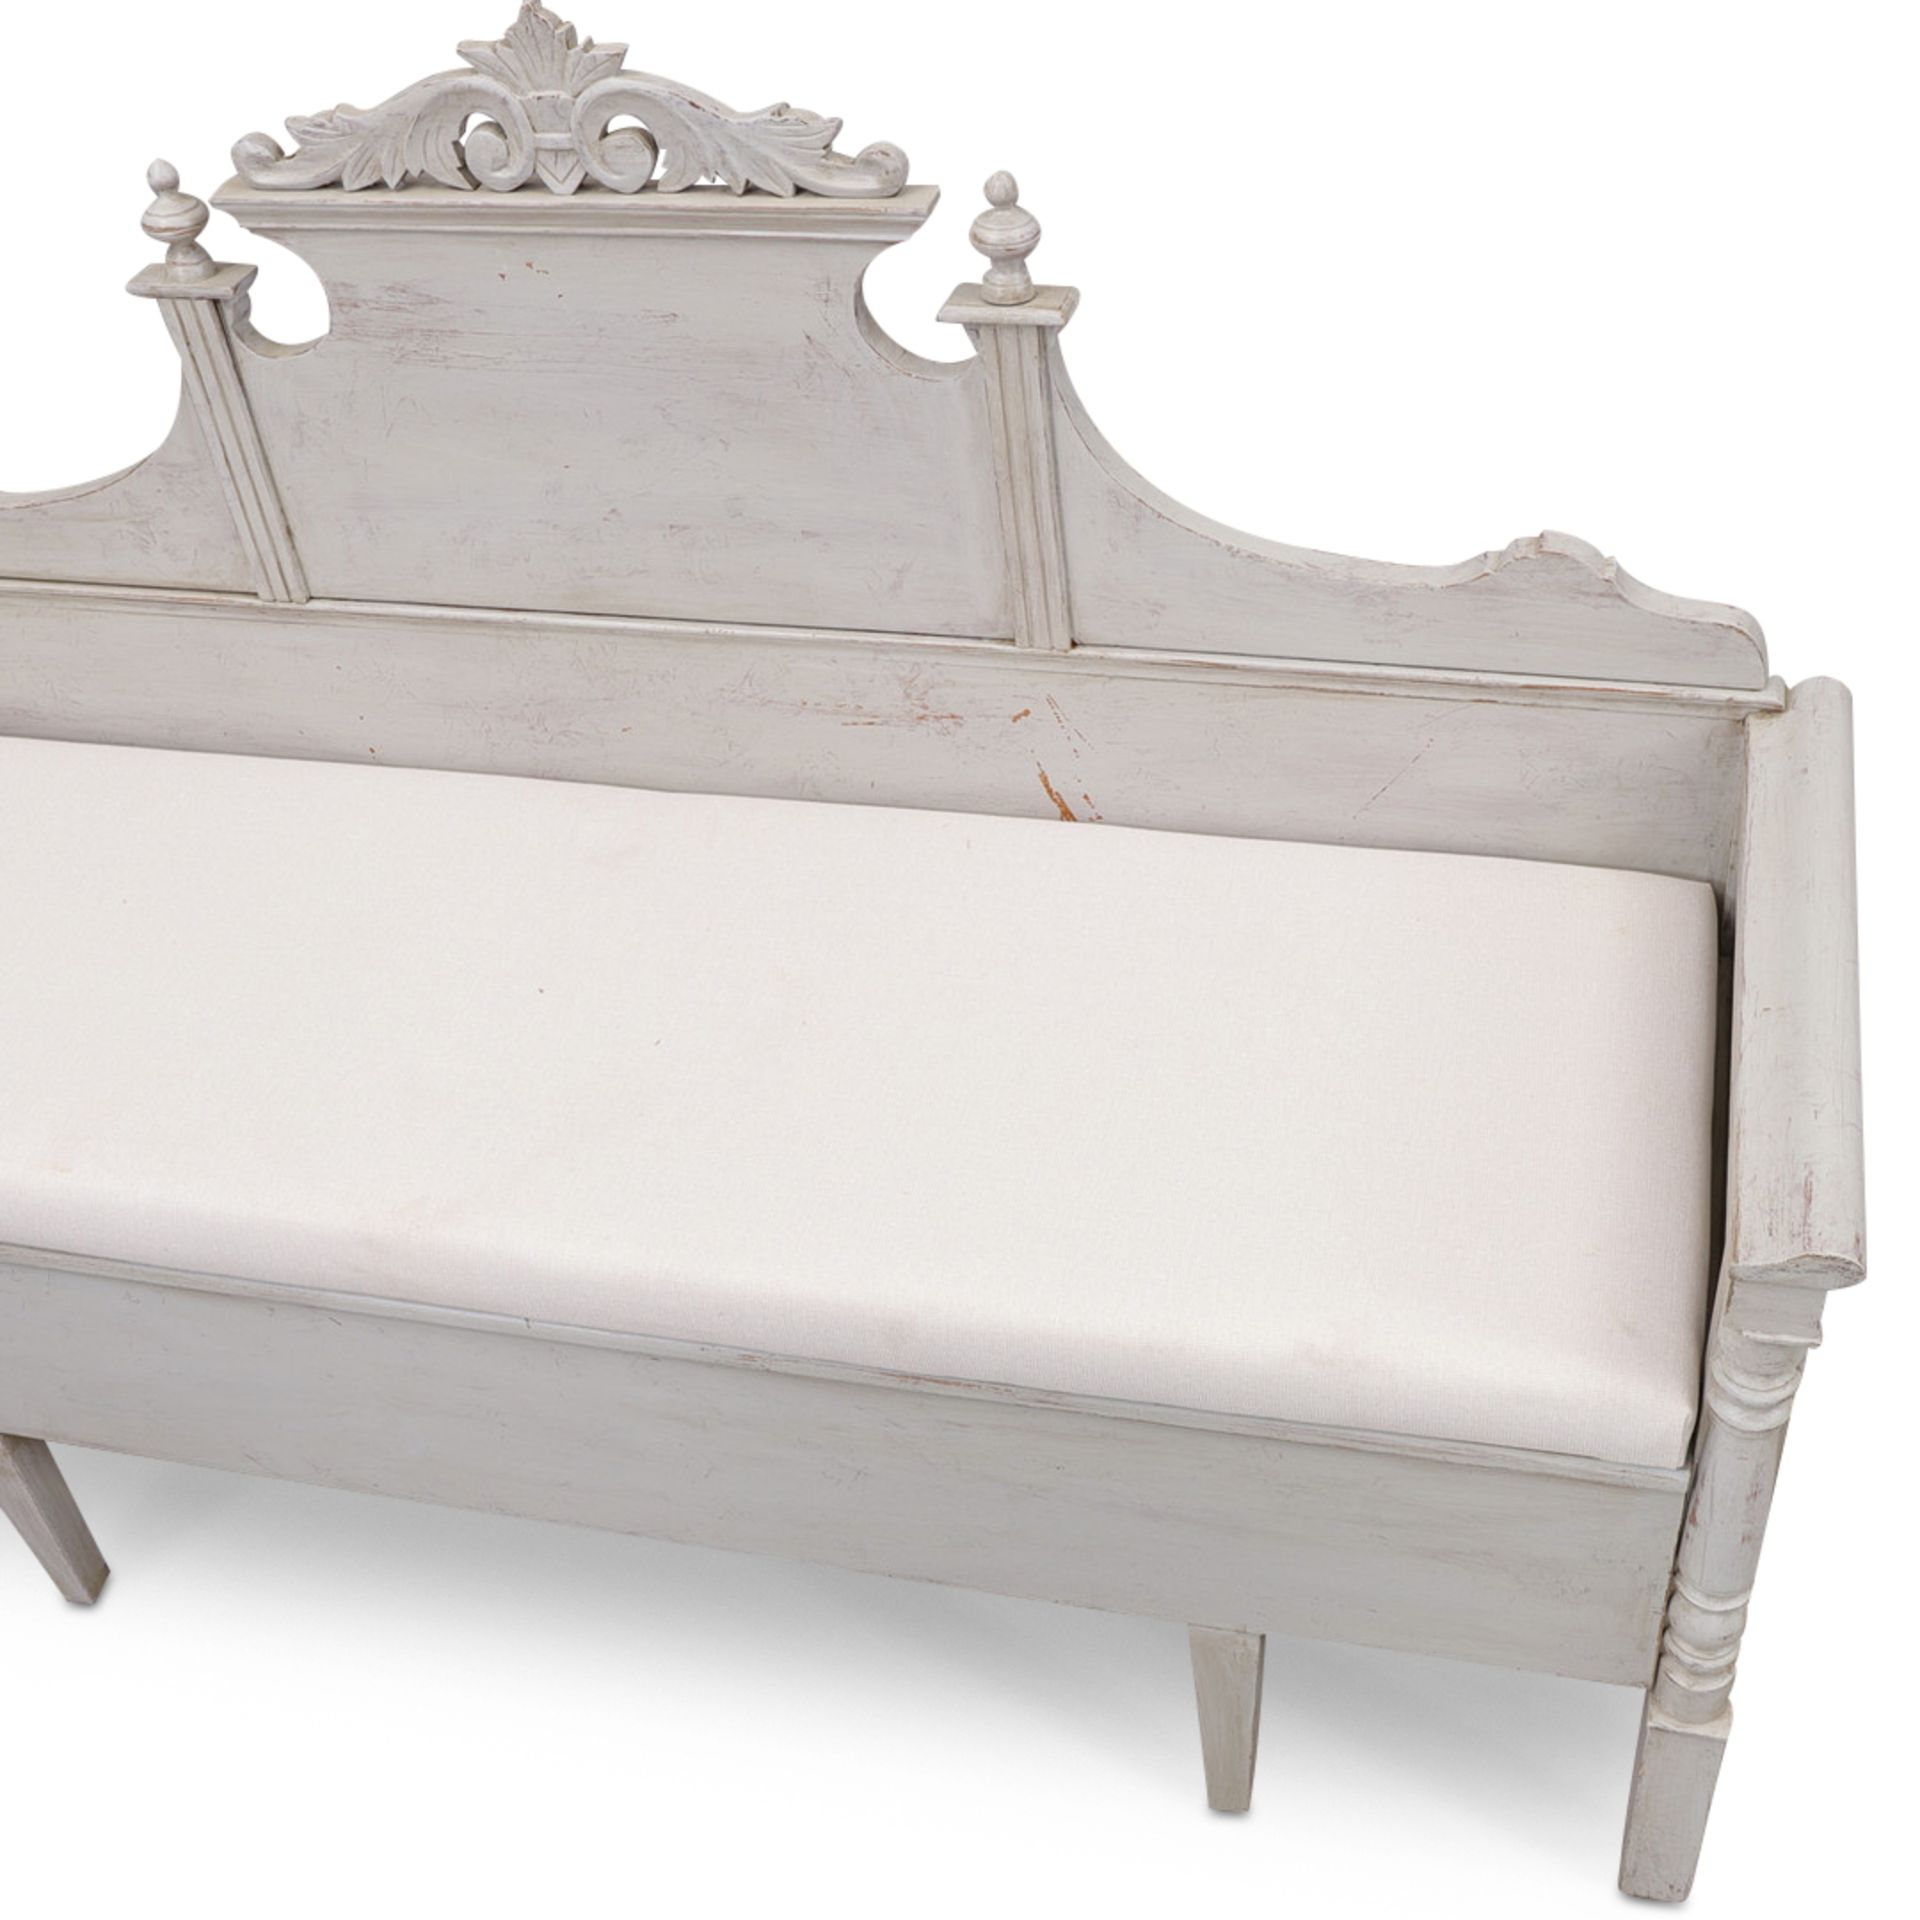 A 19TH CENTURY SWEDISH GUSTAVIAN PAINTED WOOD SETTLE - Image 3 of 4